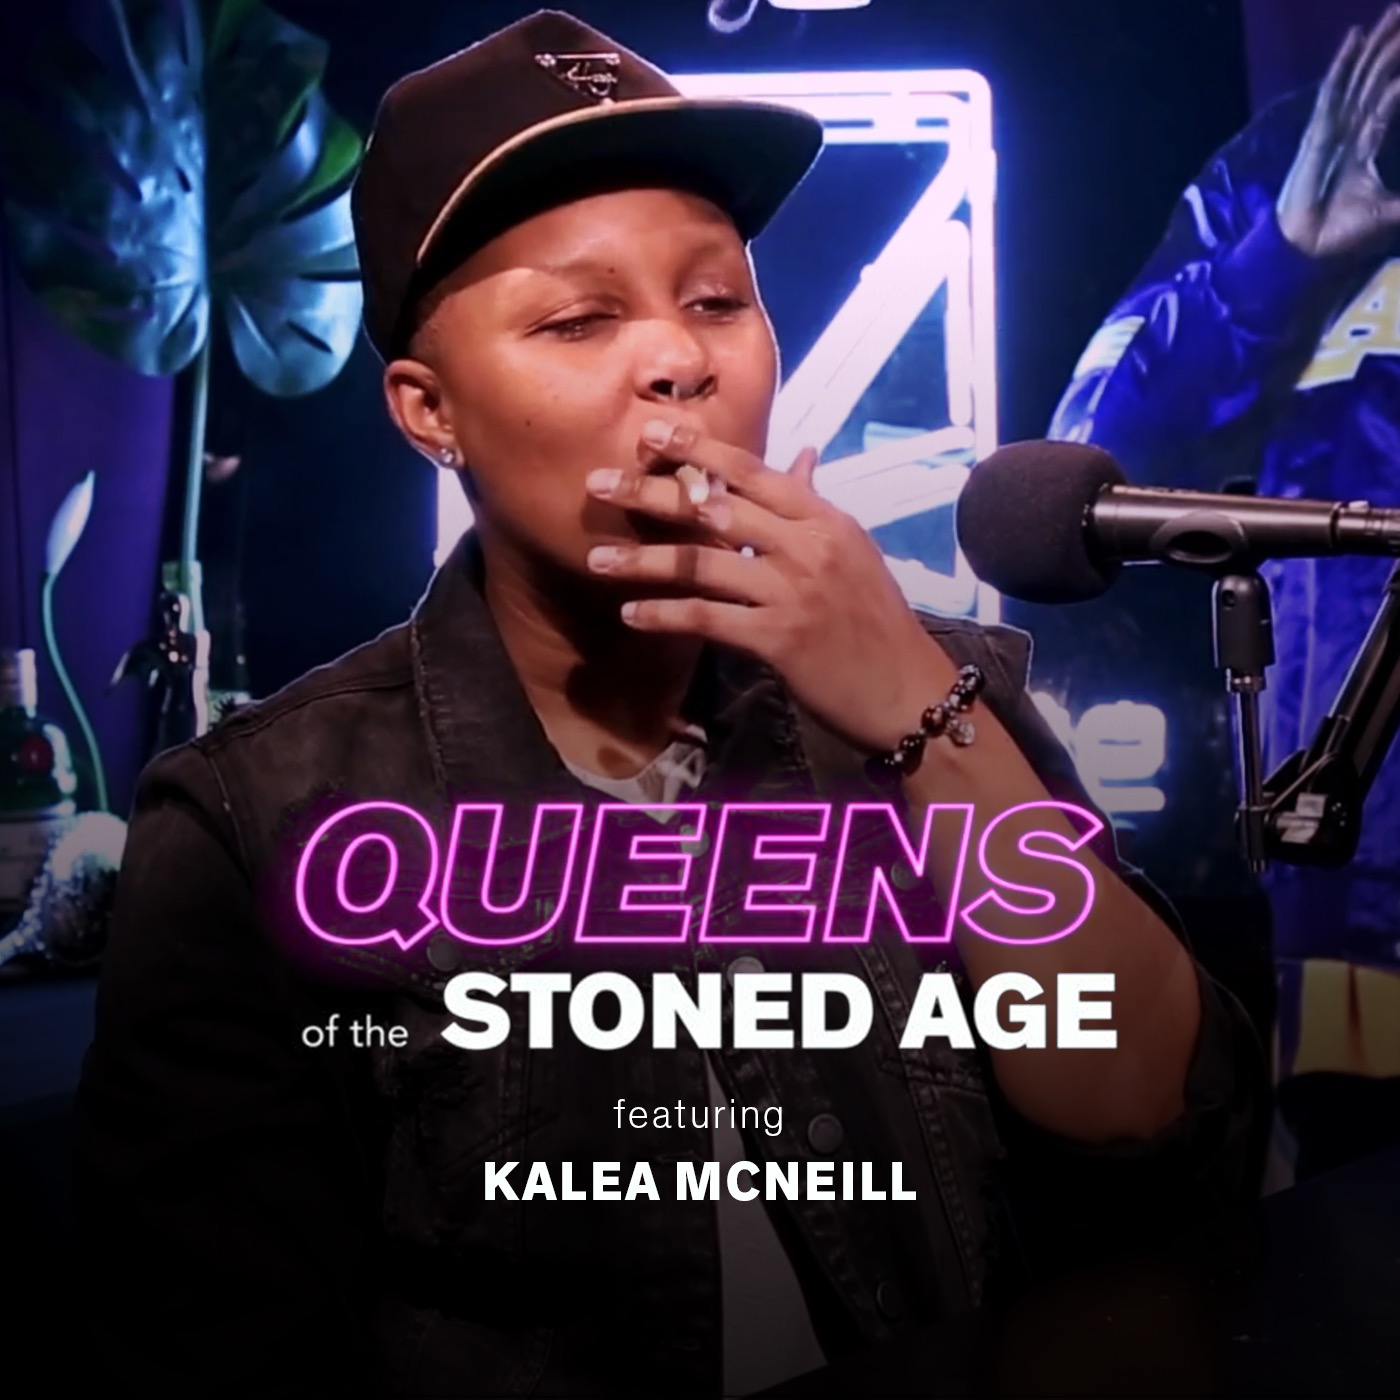 Kalea McNeill Talks Wake ‘n Bakes and Comedy on “Queens of the Stoned Age”